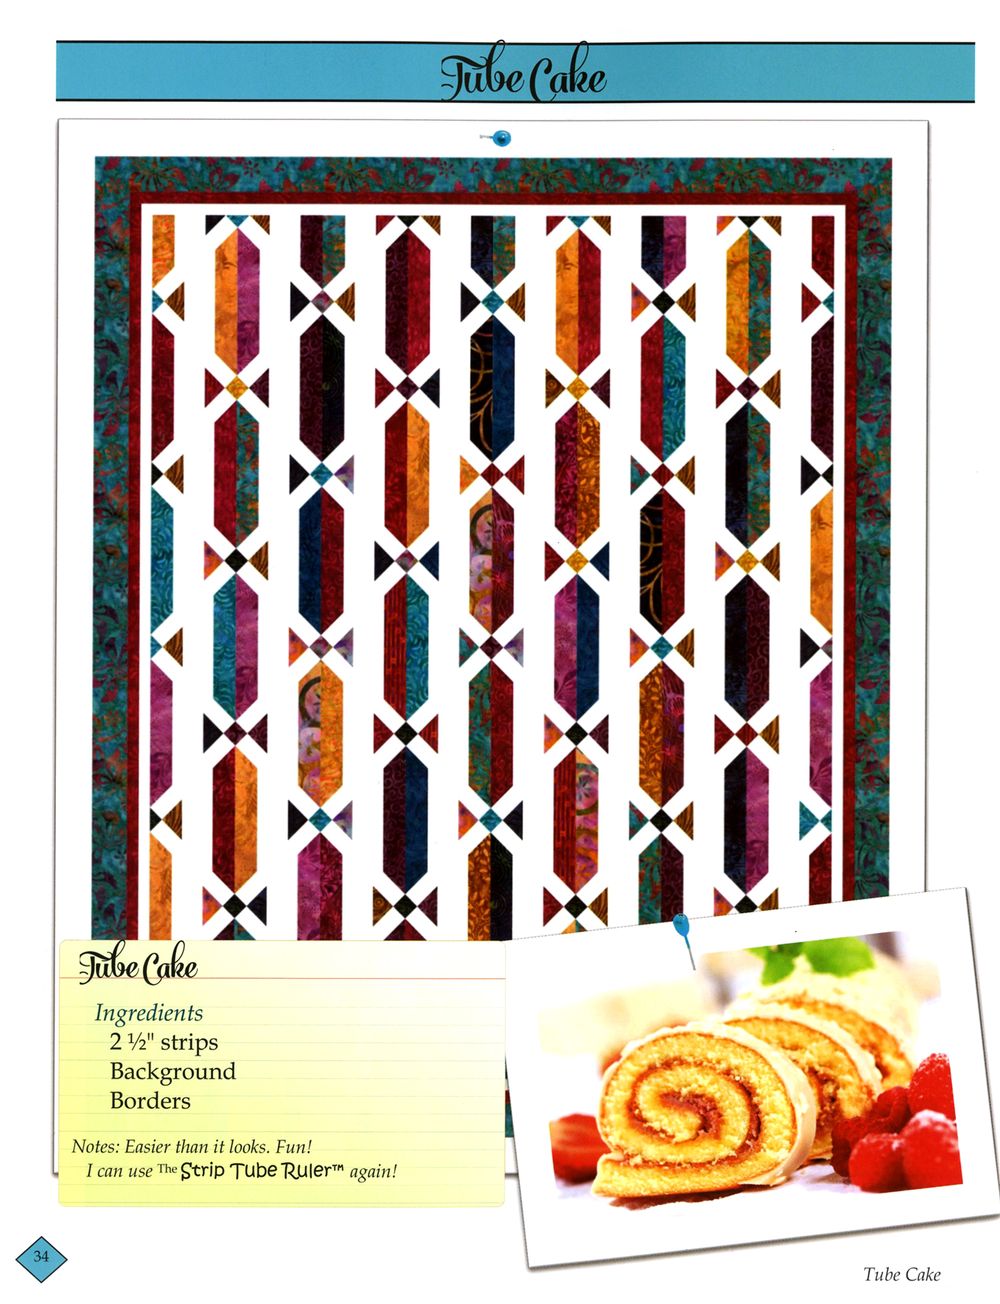 Sweet Tooth Quilt Pattern book by Daniela Stout of Cozy Quilt Designs